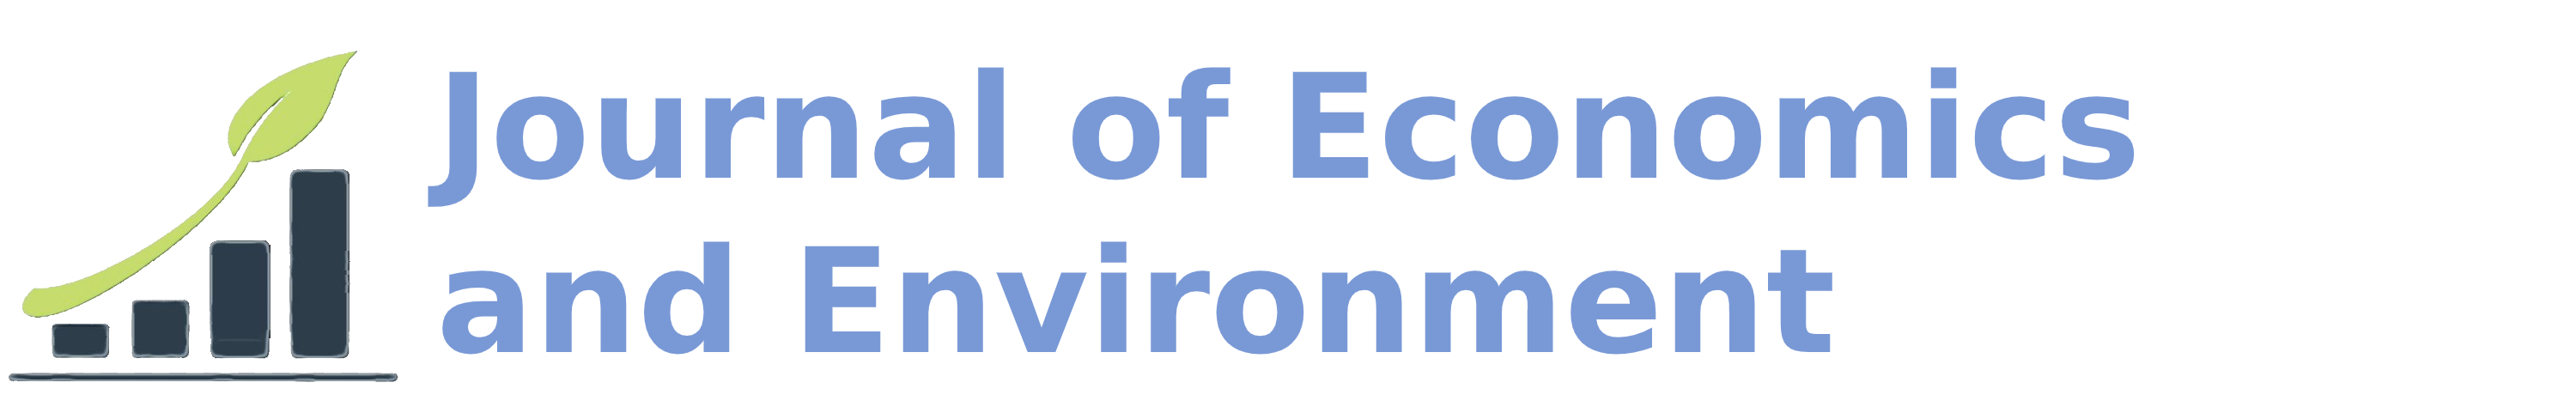 Journal of Economics and Environment